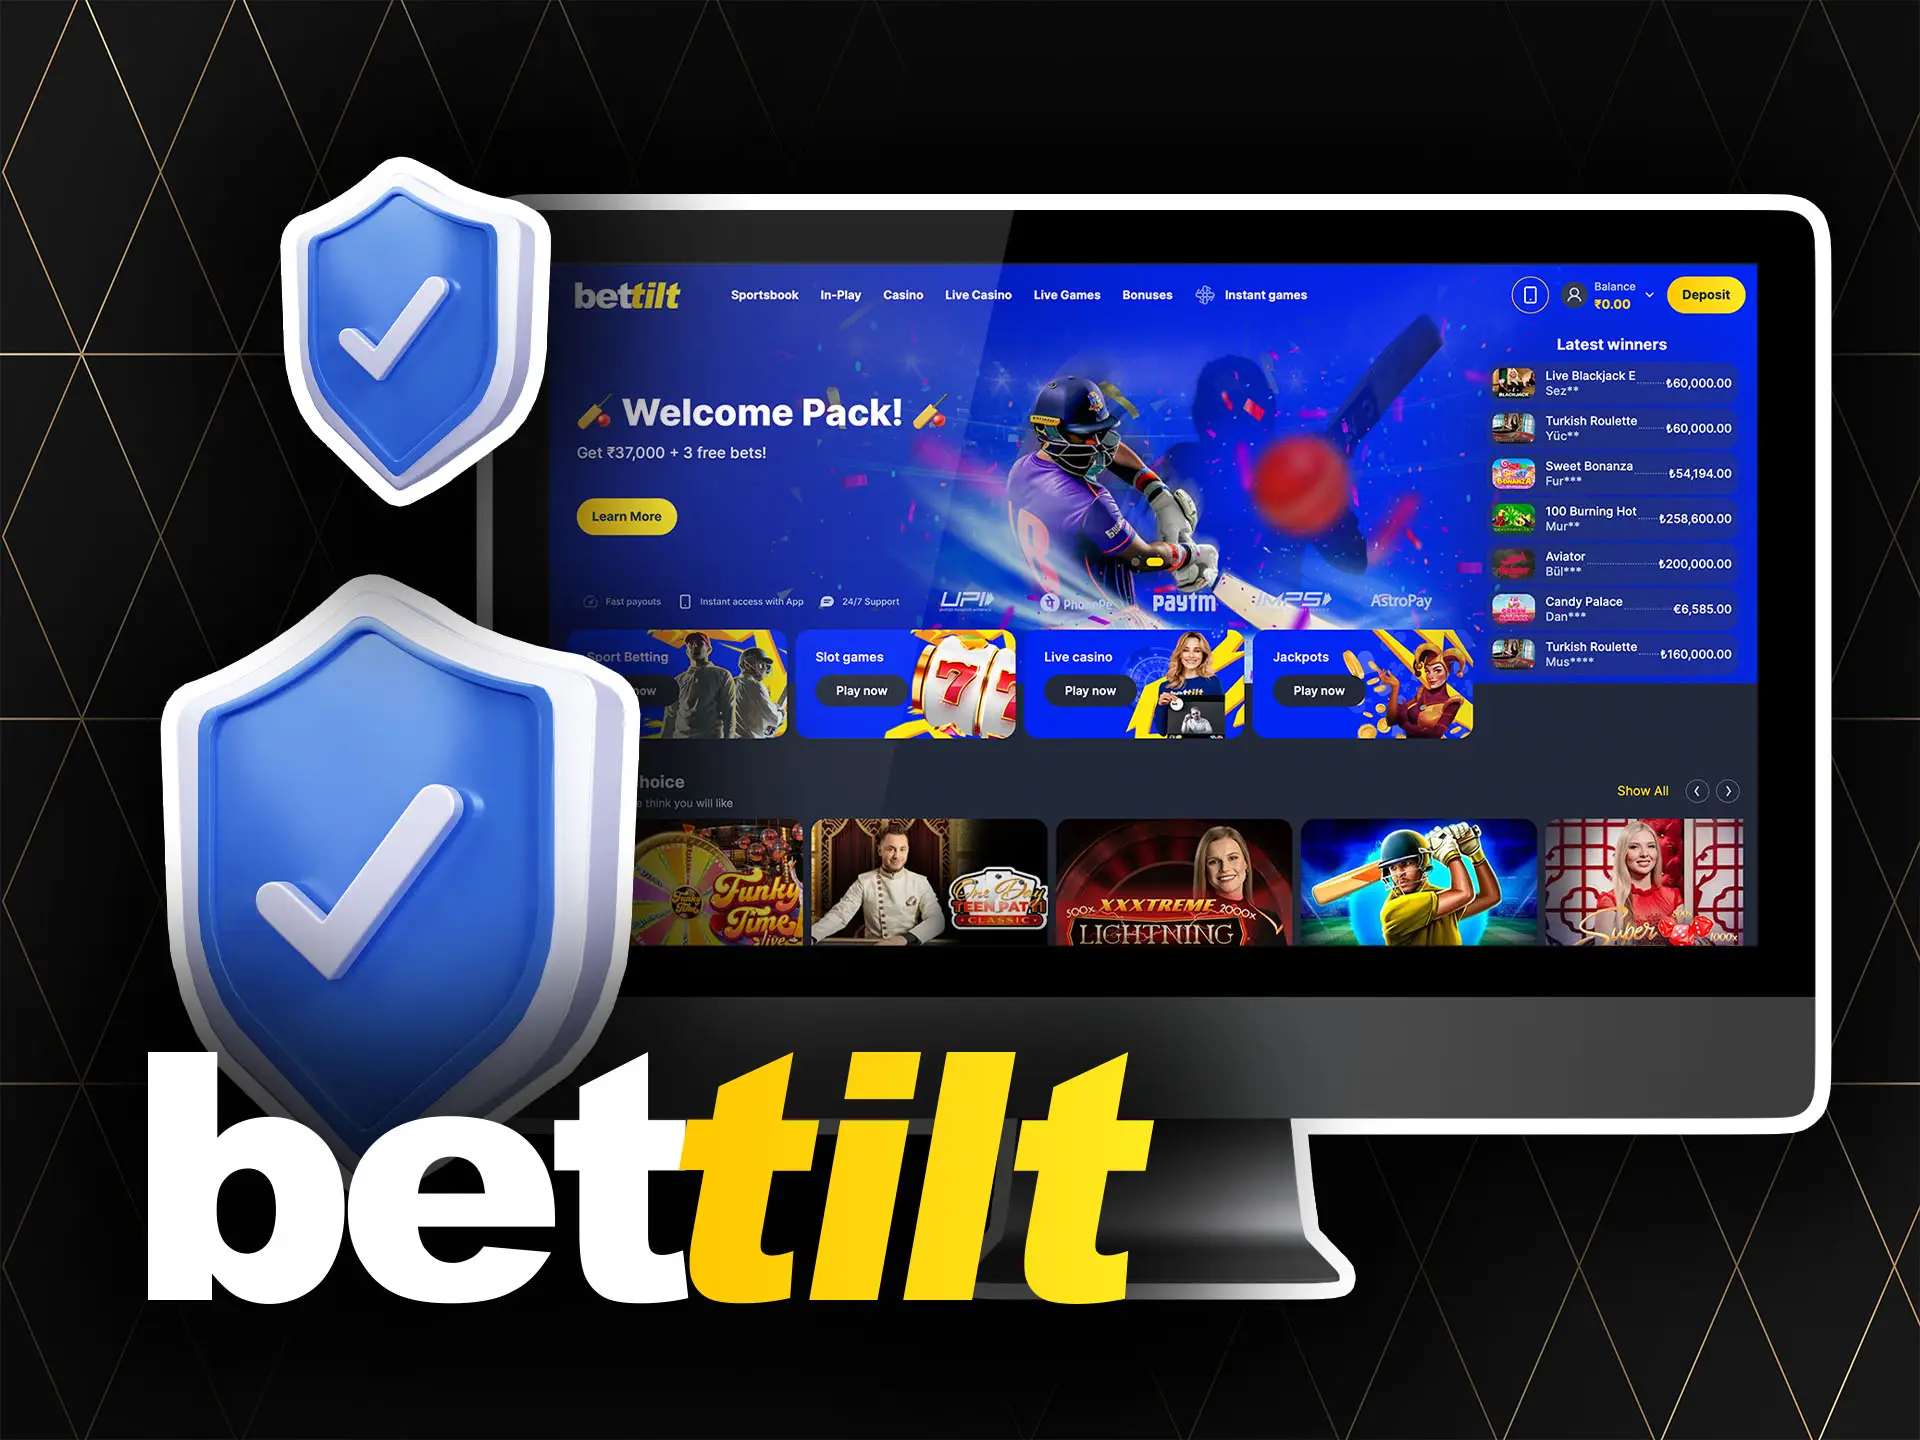 Bettilt is safe and secure to bet on money.